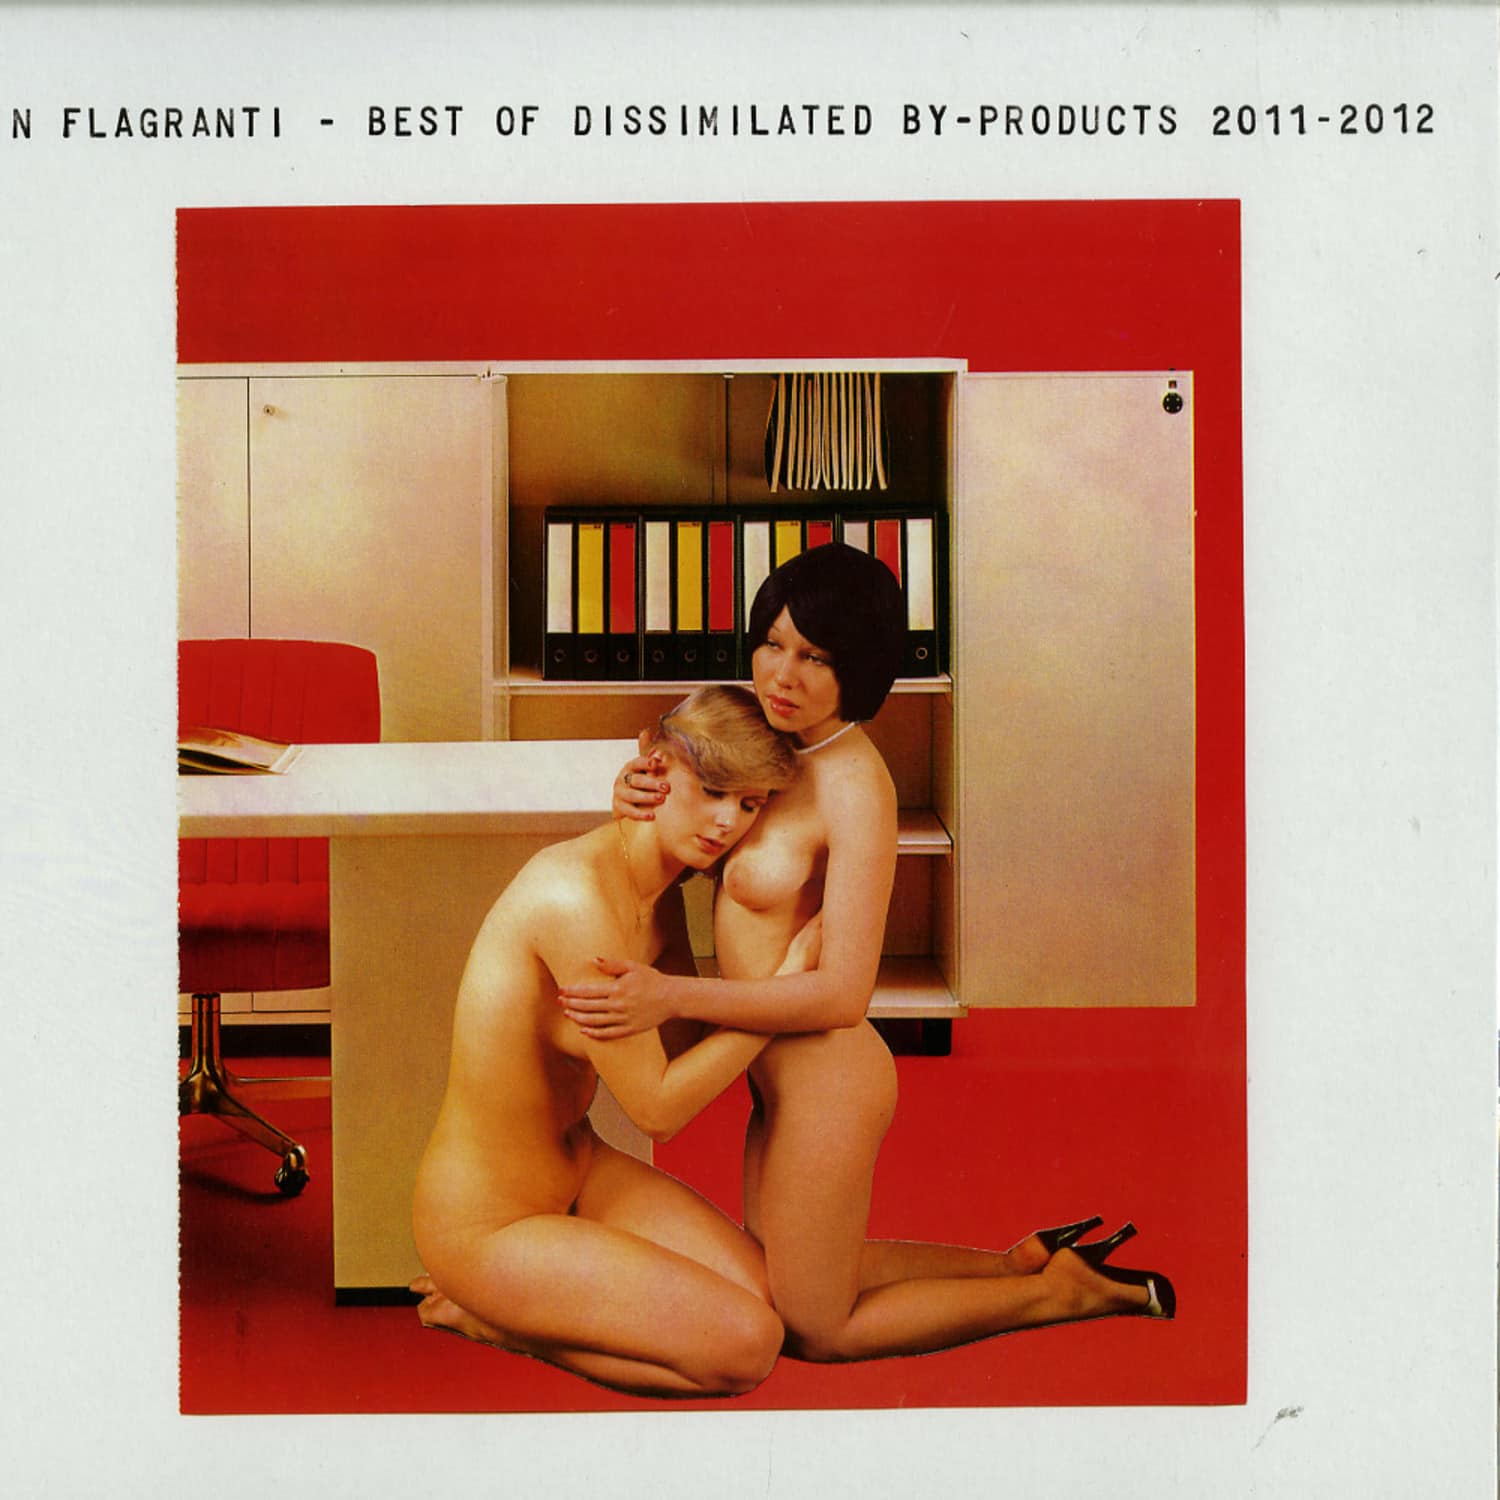 In Flagranti - BEST OF DISSIMILATED BY - PRODUCTS 2011 2012 